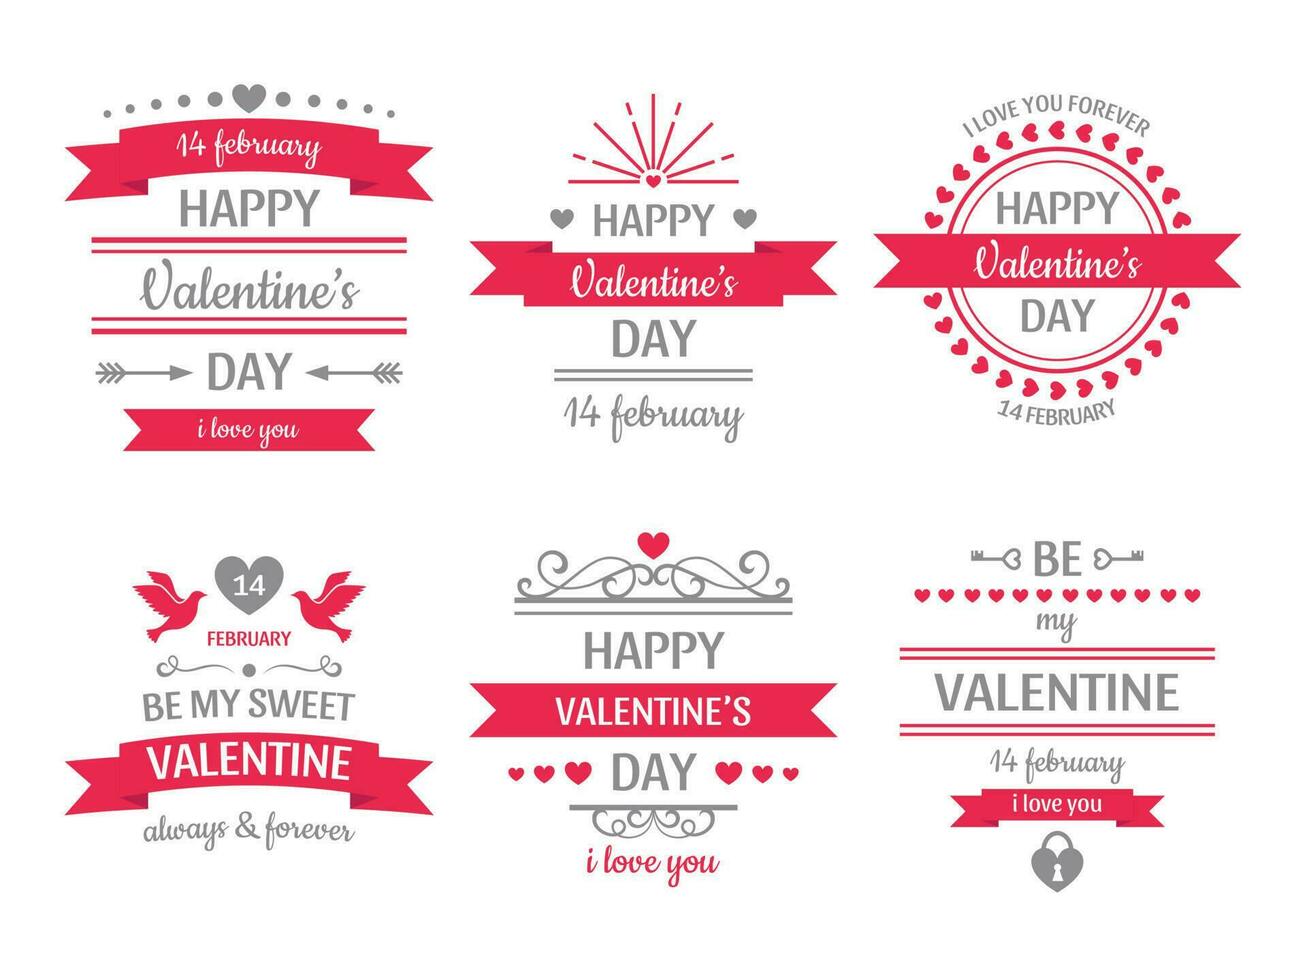 Valentines day sign. Vintage valentine card, retro love couple hearts labels and love wishes heart frame vector illustration set